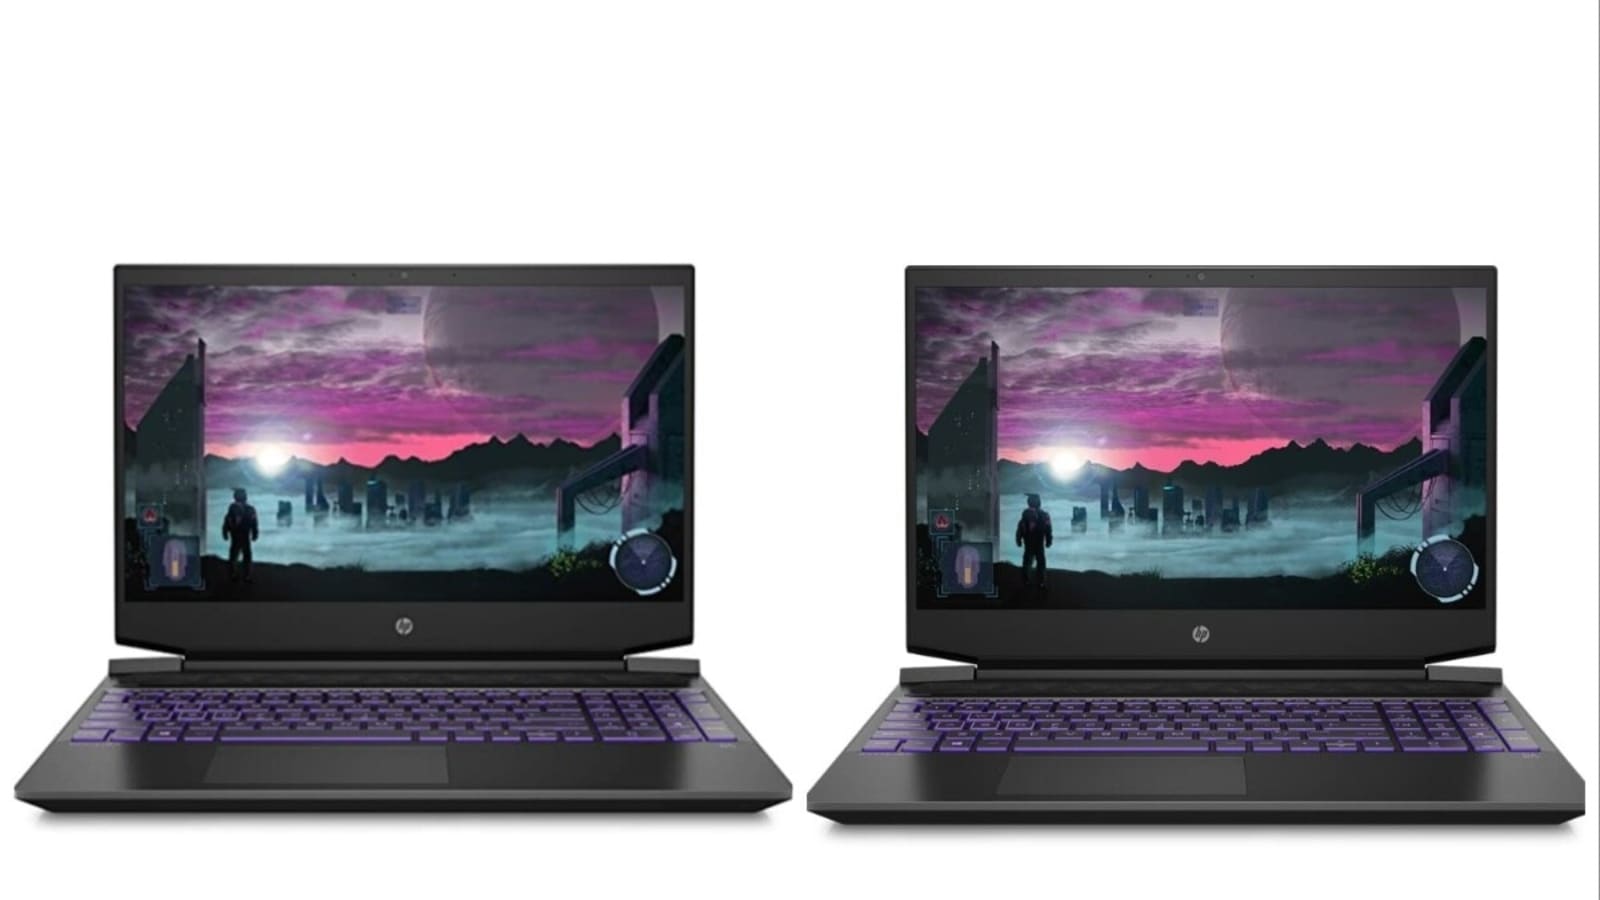 Elevate Your Computing Game with HP Pavilion Gaming Laptop